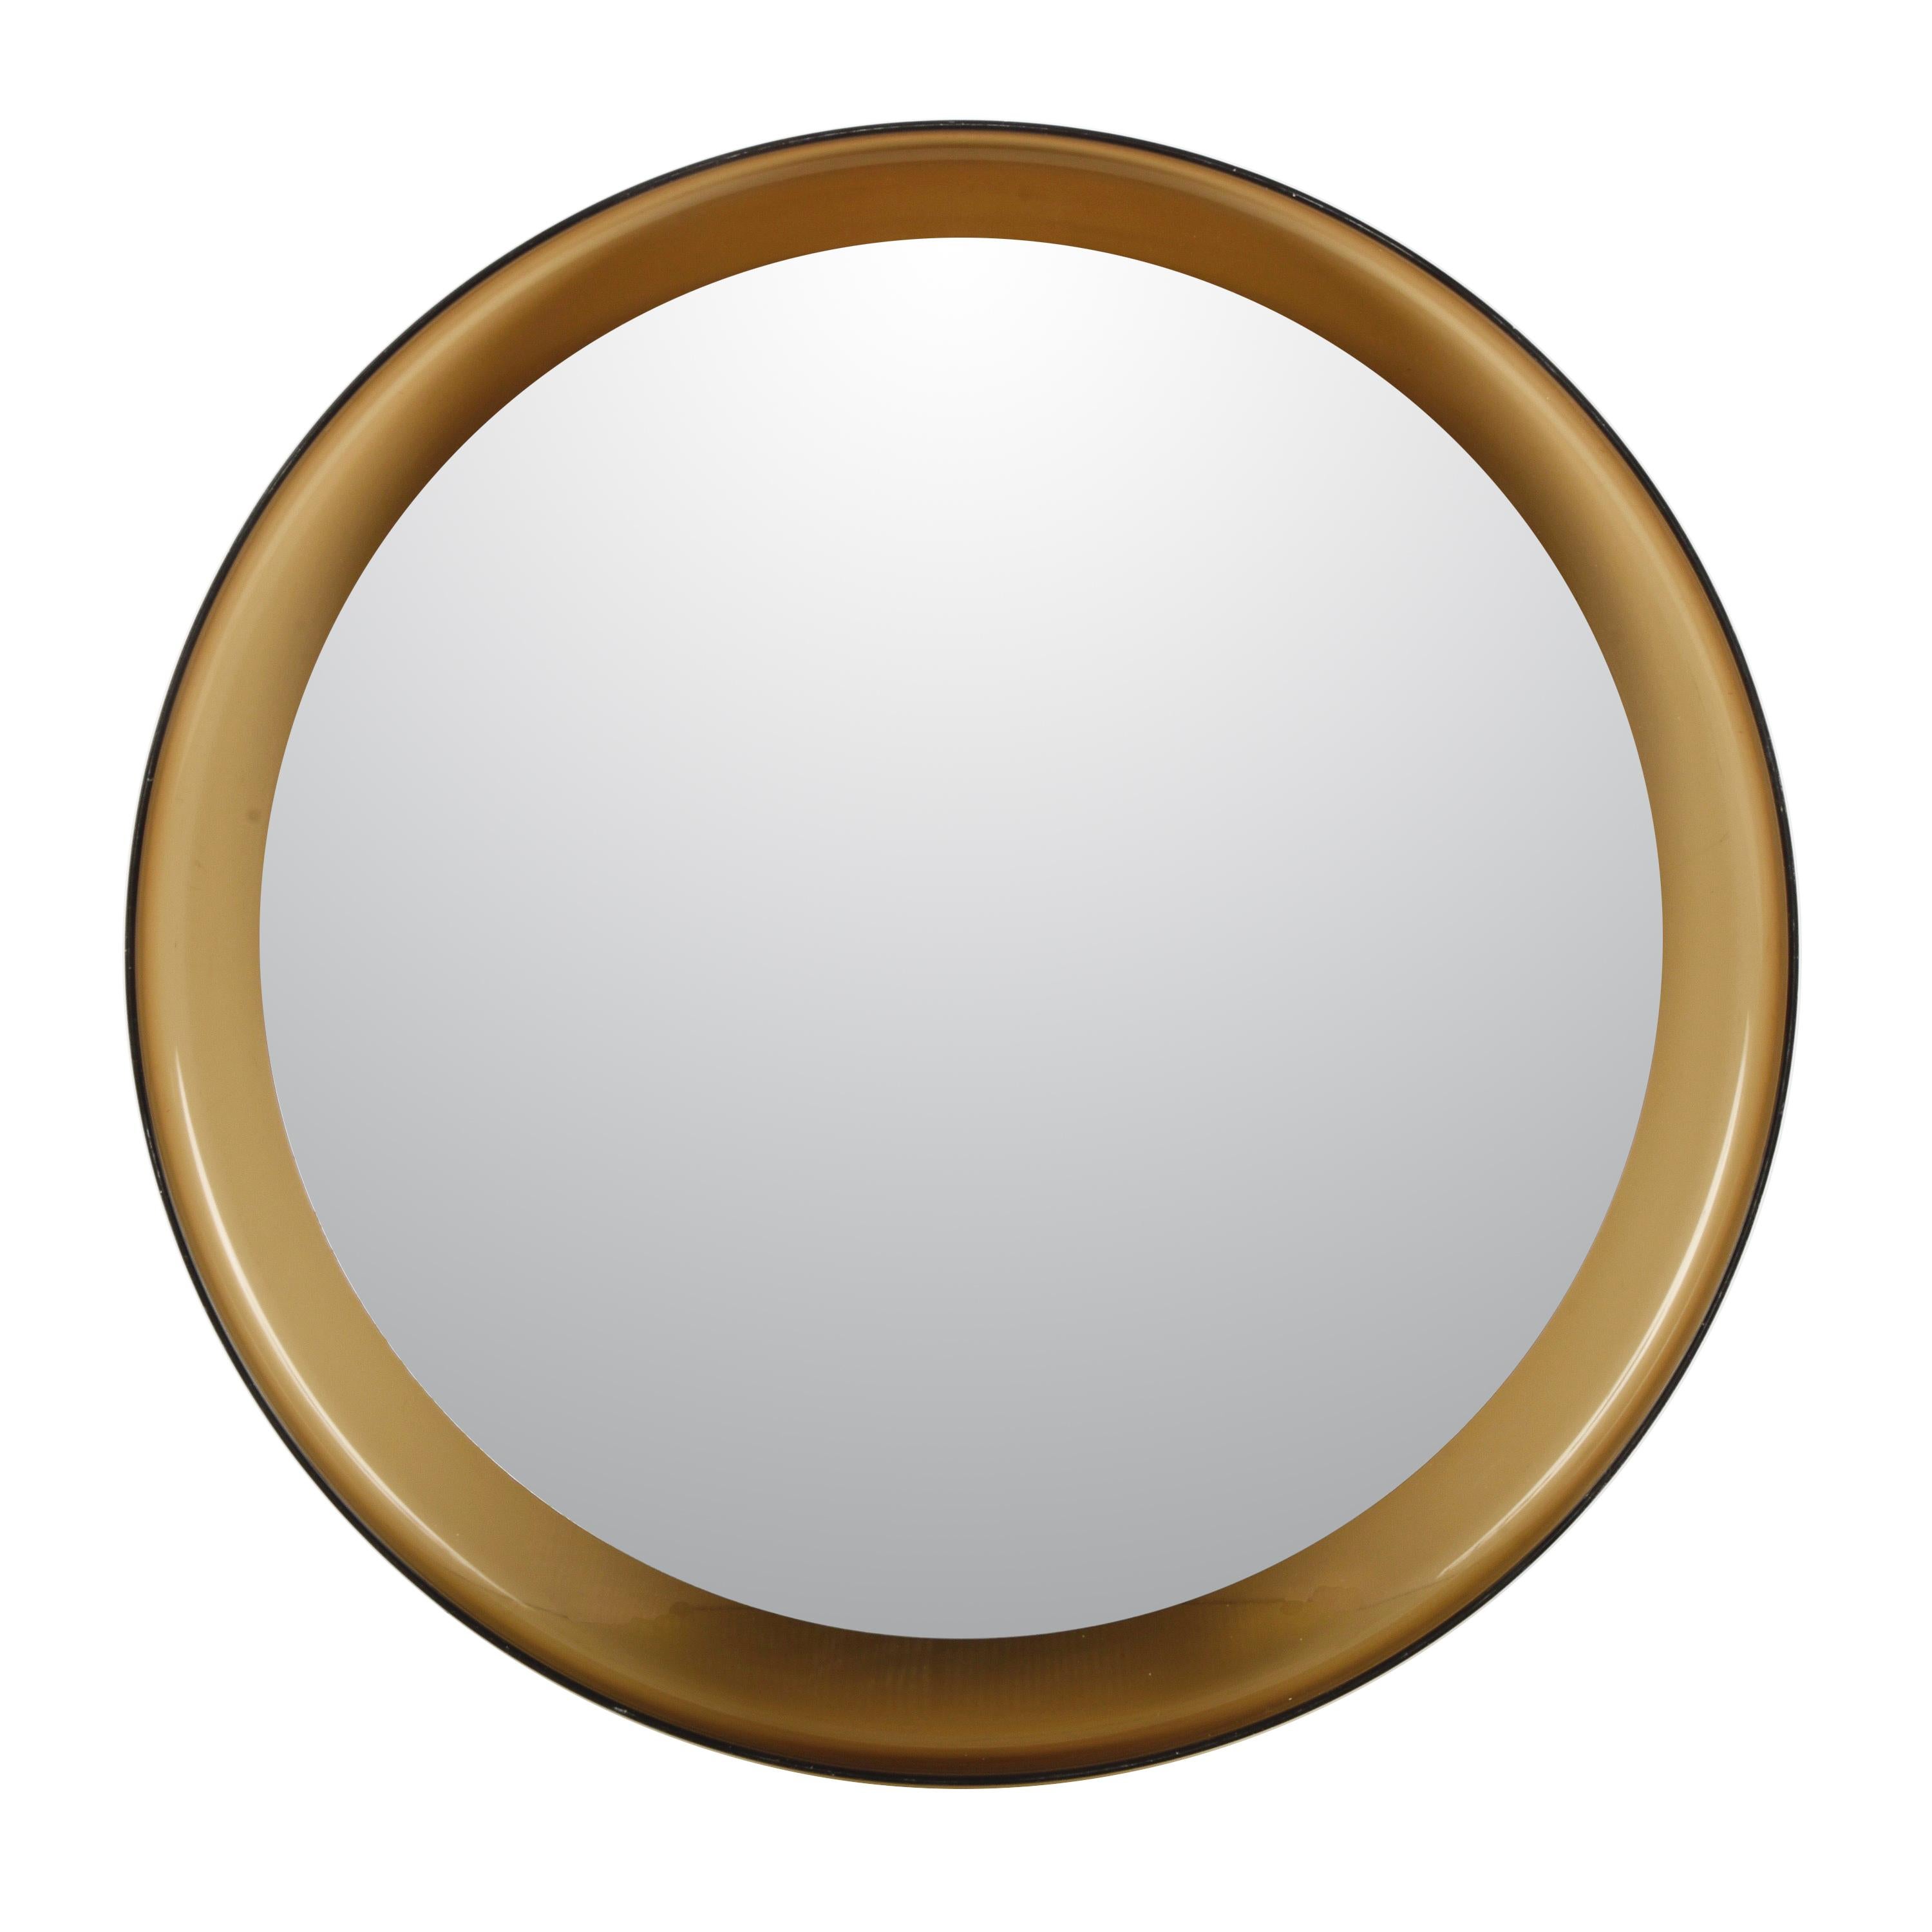 Midcentury Guzzini Italian Round Lucite Smoked Brown Wall Mirror, 1960s For Sale 8